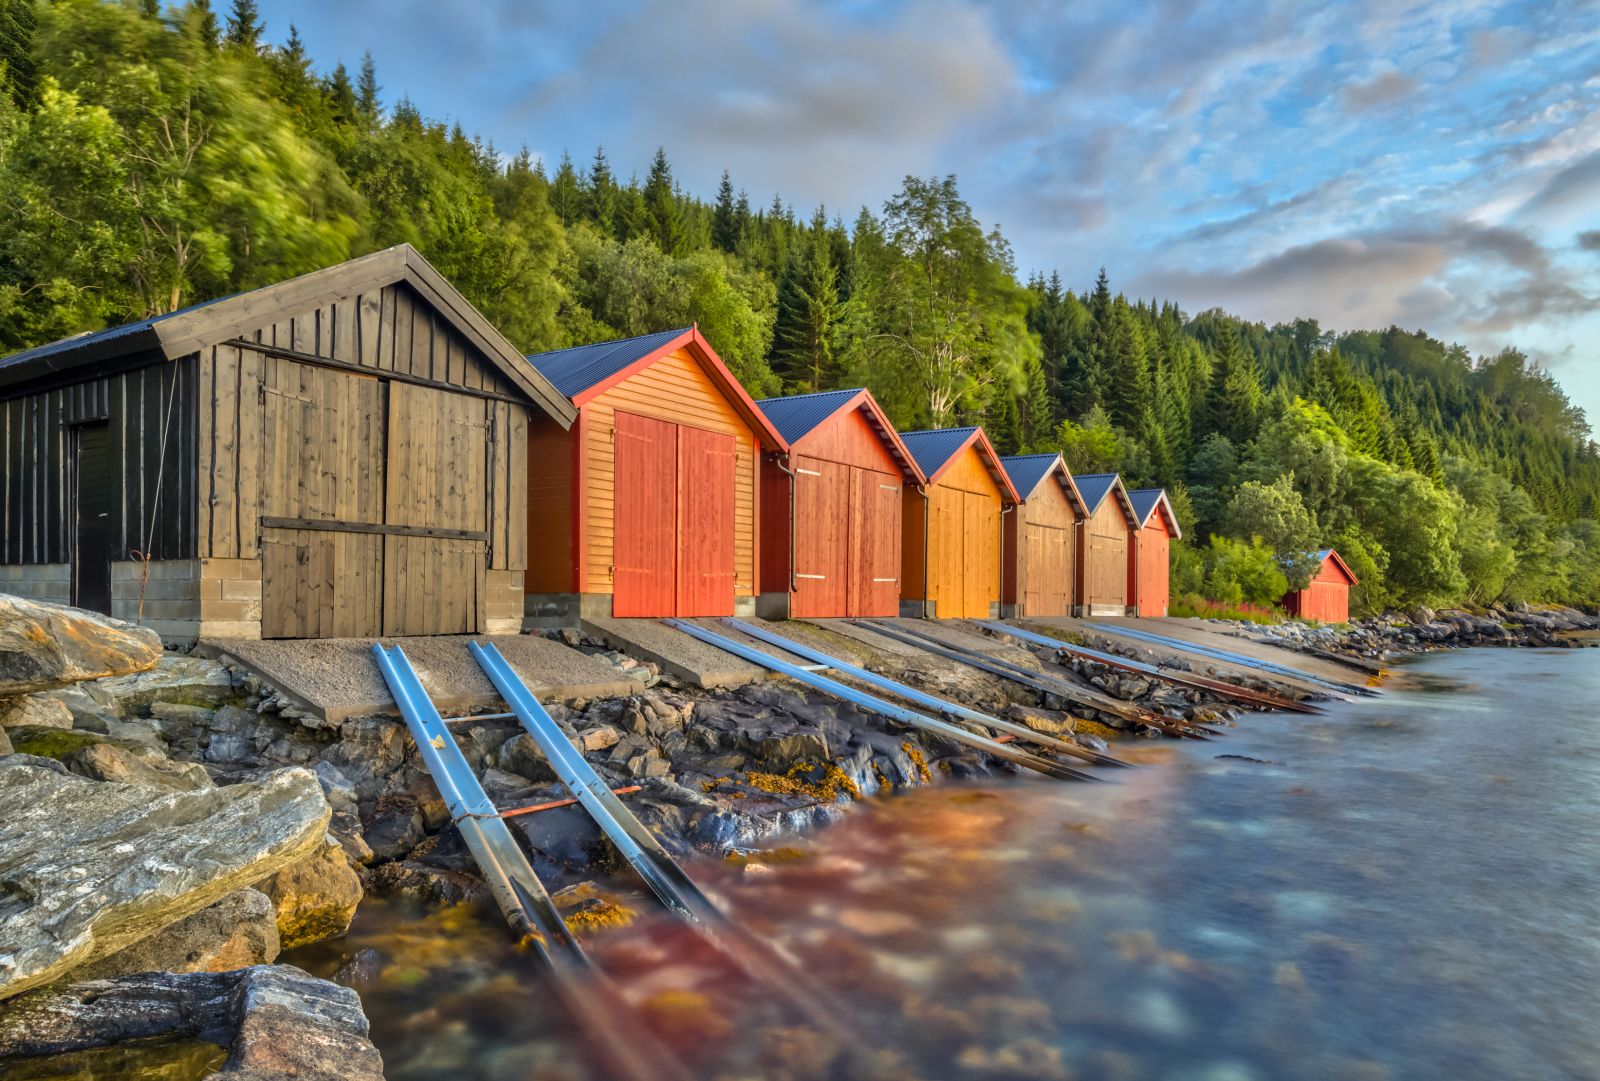 Colourful boat houses on the waters edge in Romsdalfjord Norway